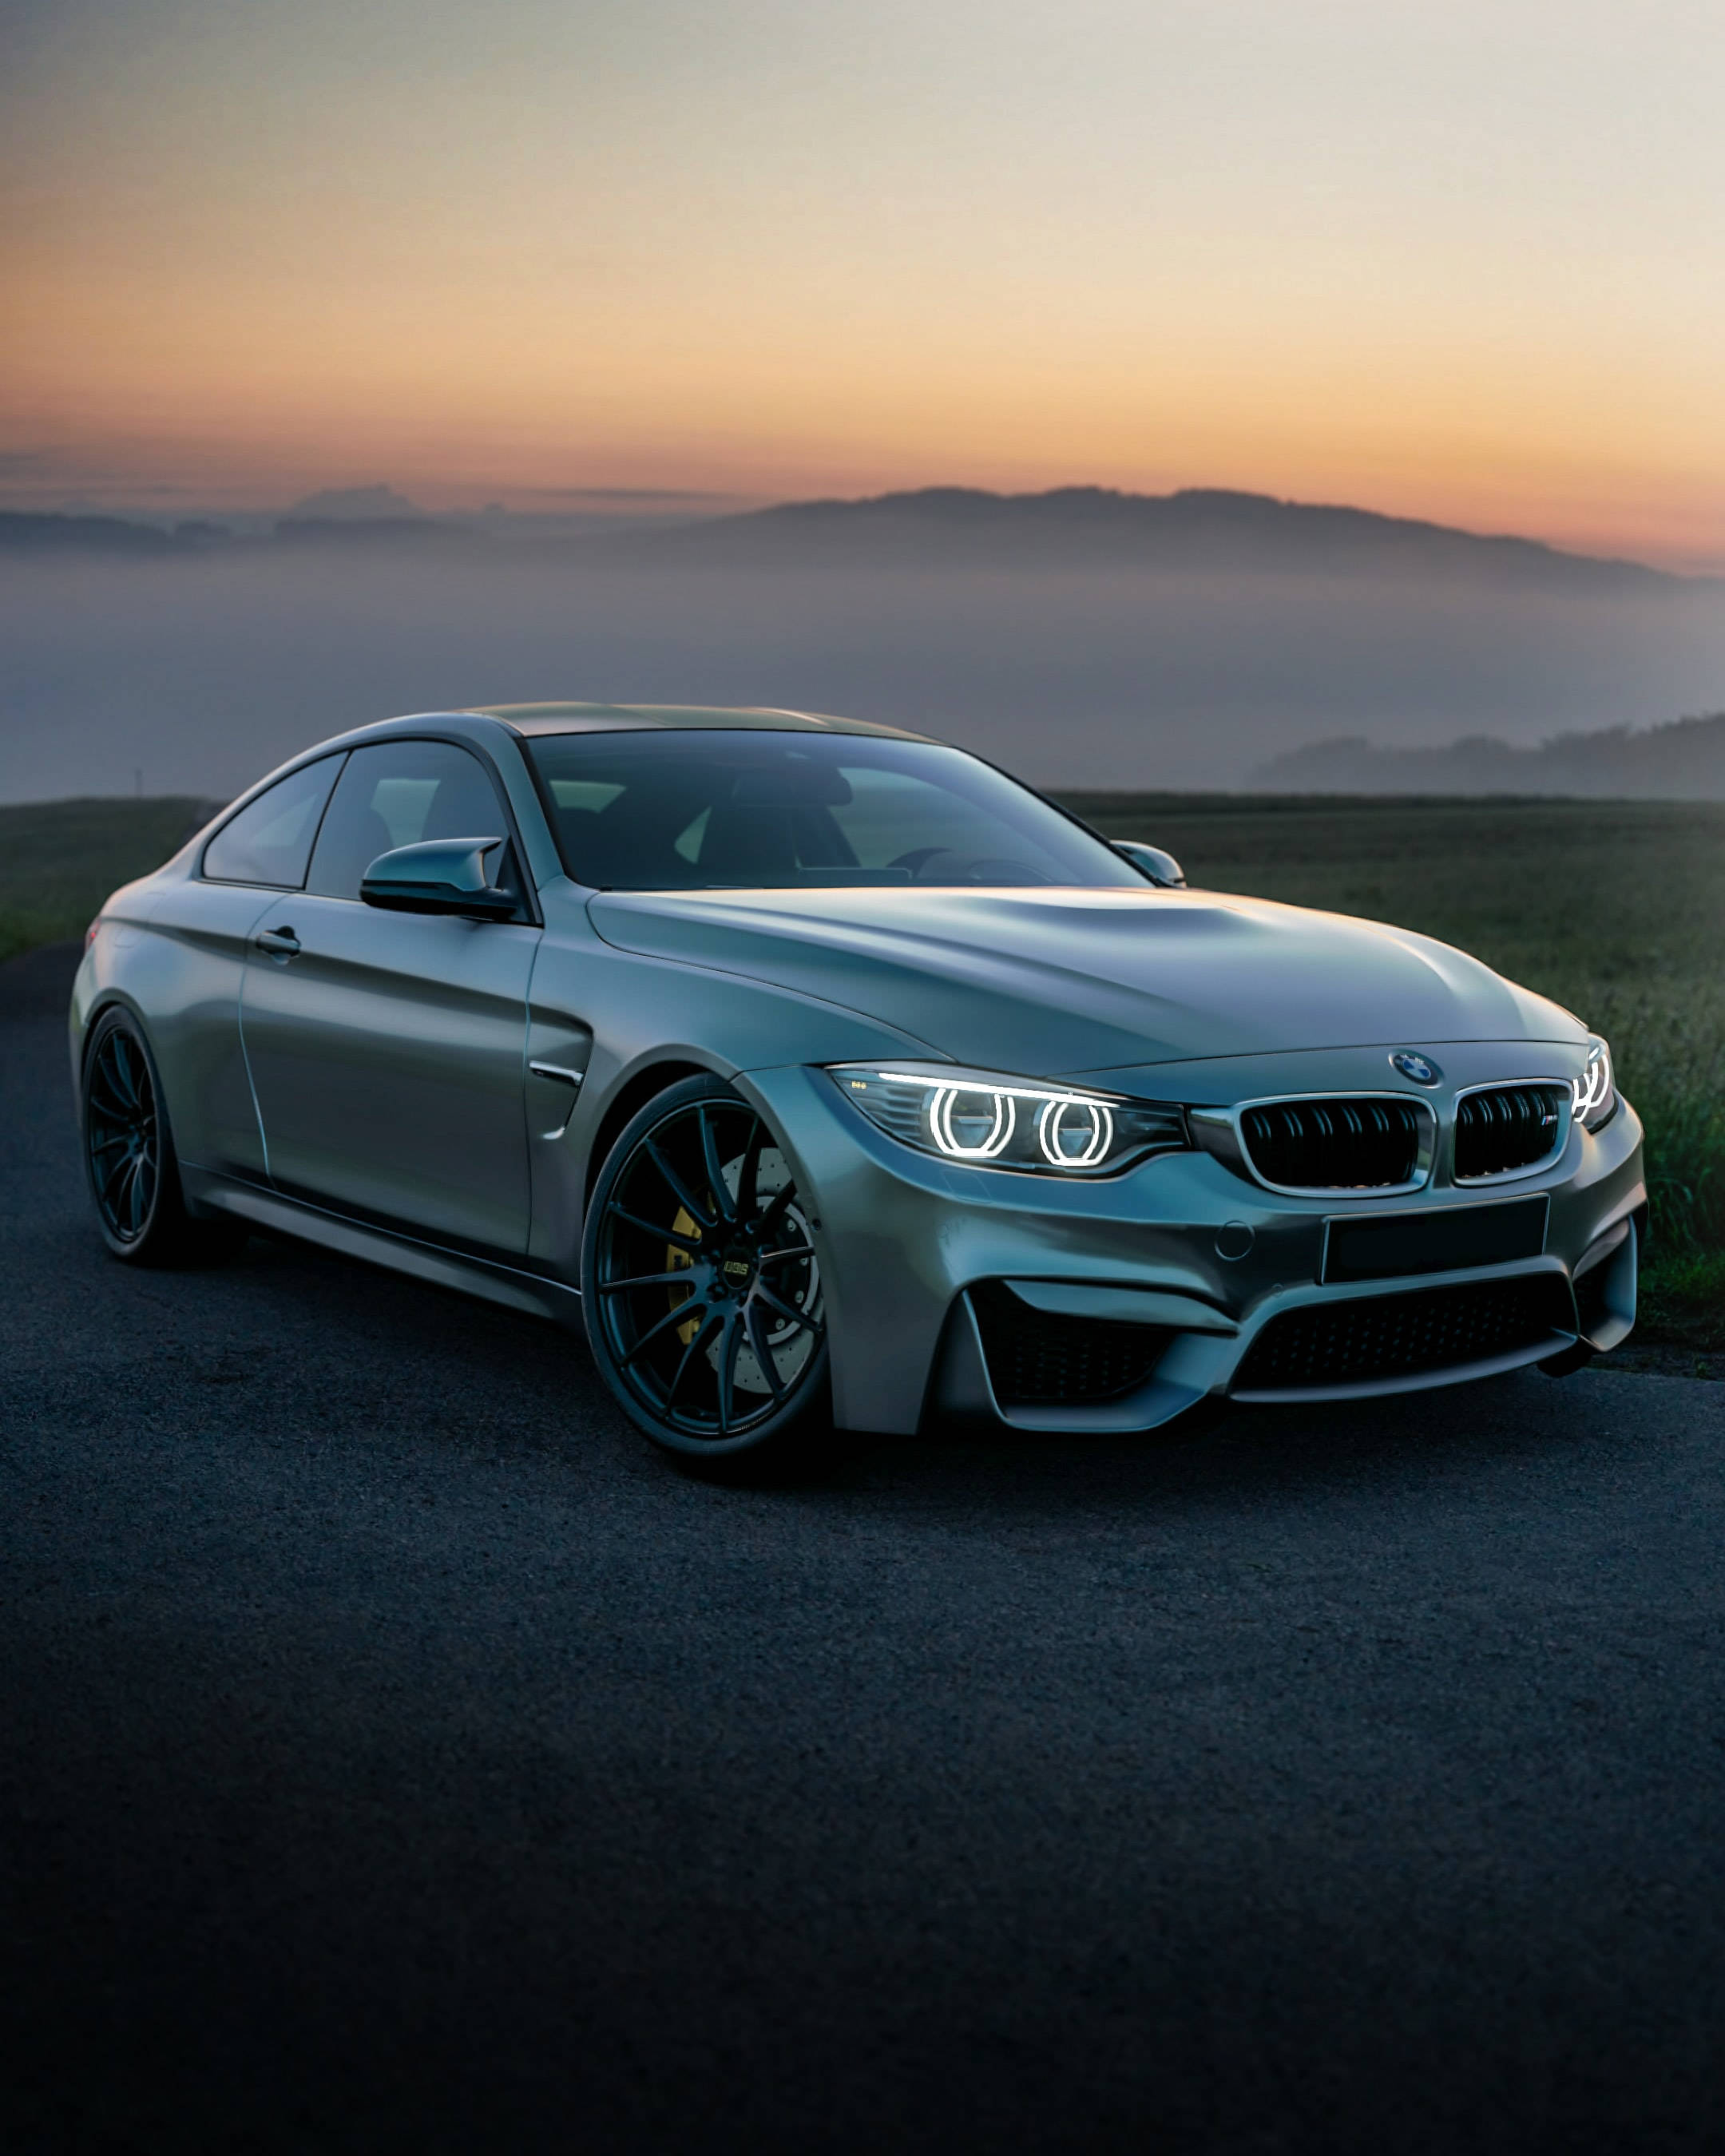 A grey BMW M4 sits on a road with a mountain range in the background - BMW